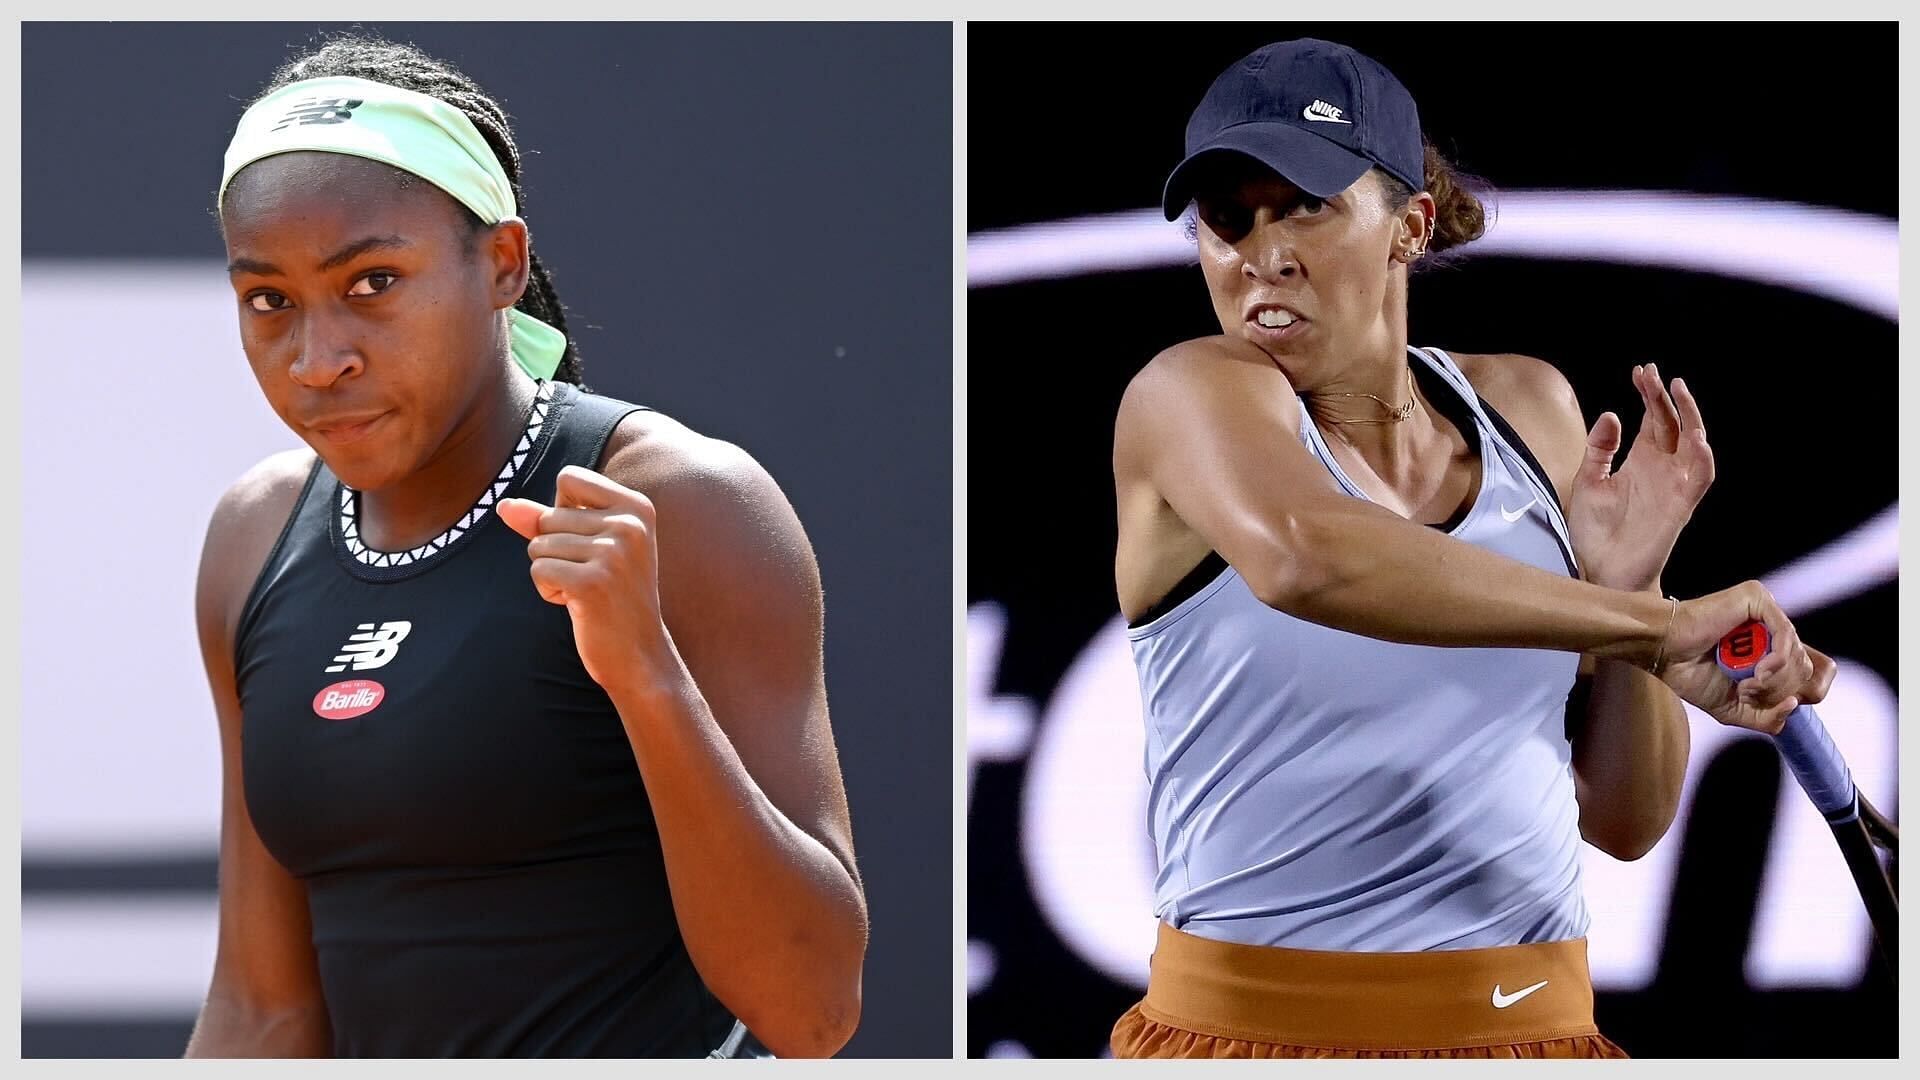 Coco Gauff vs Madison Keys is one of the last 16 matches at the Madrid Open